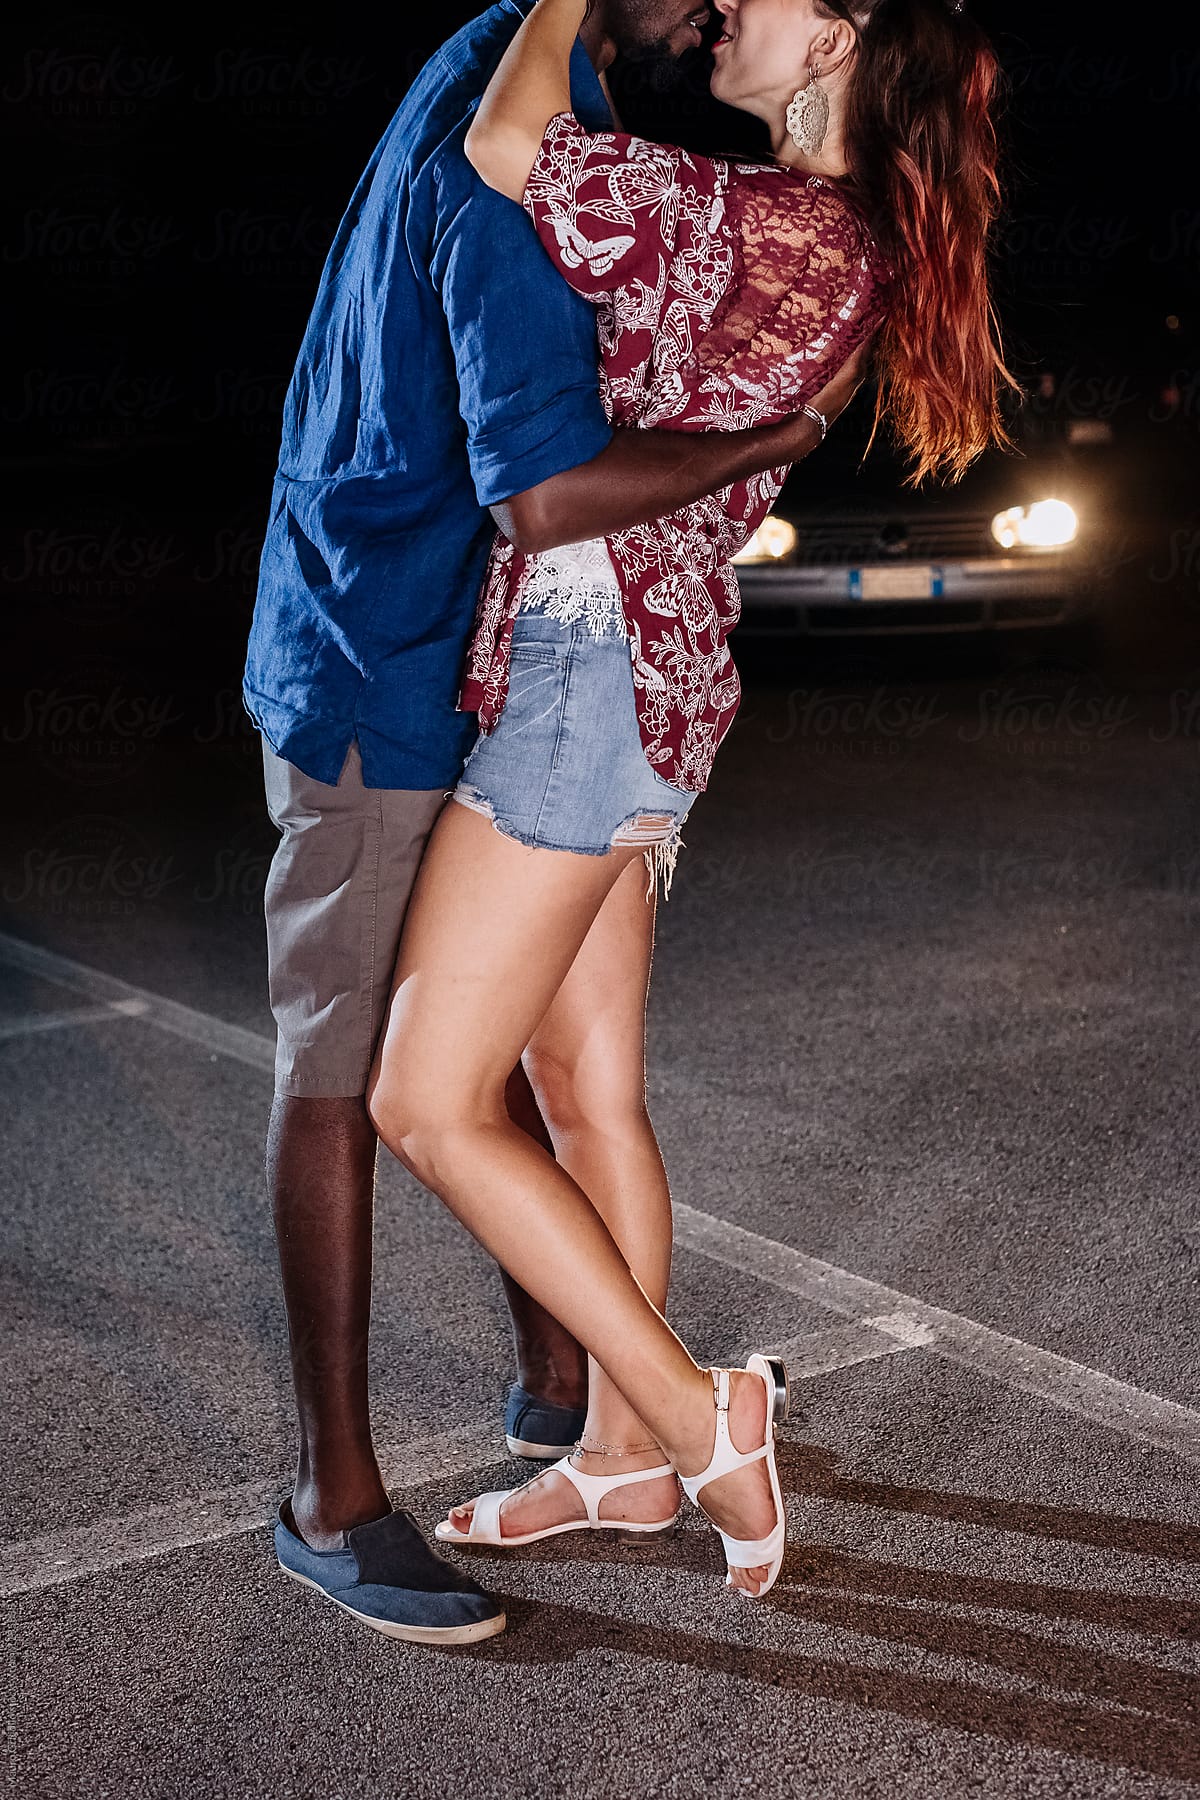 Black Man And A White Woman Kissing On The Street Del Colaborador De